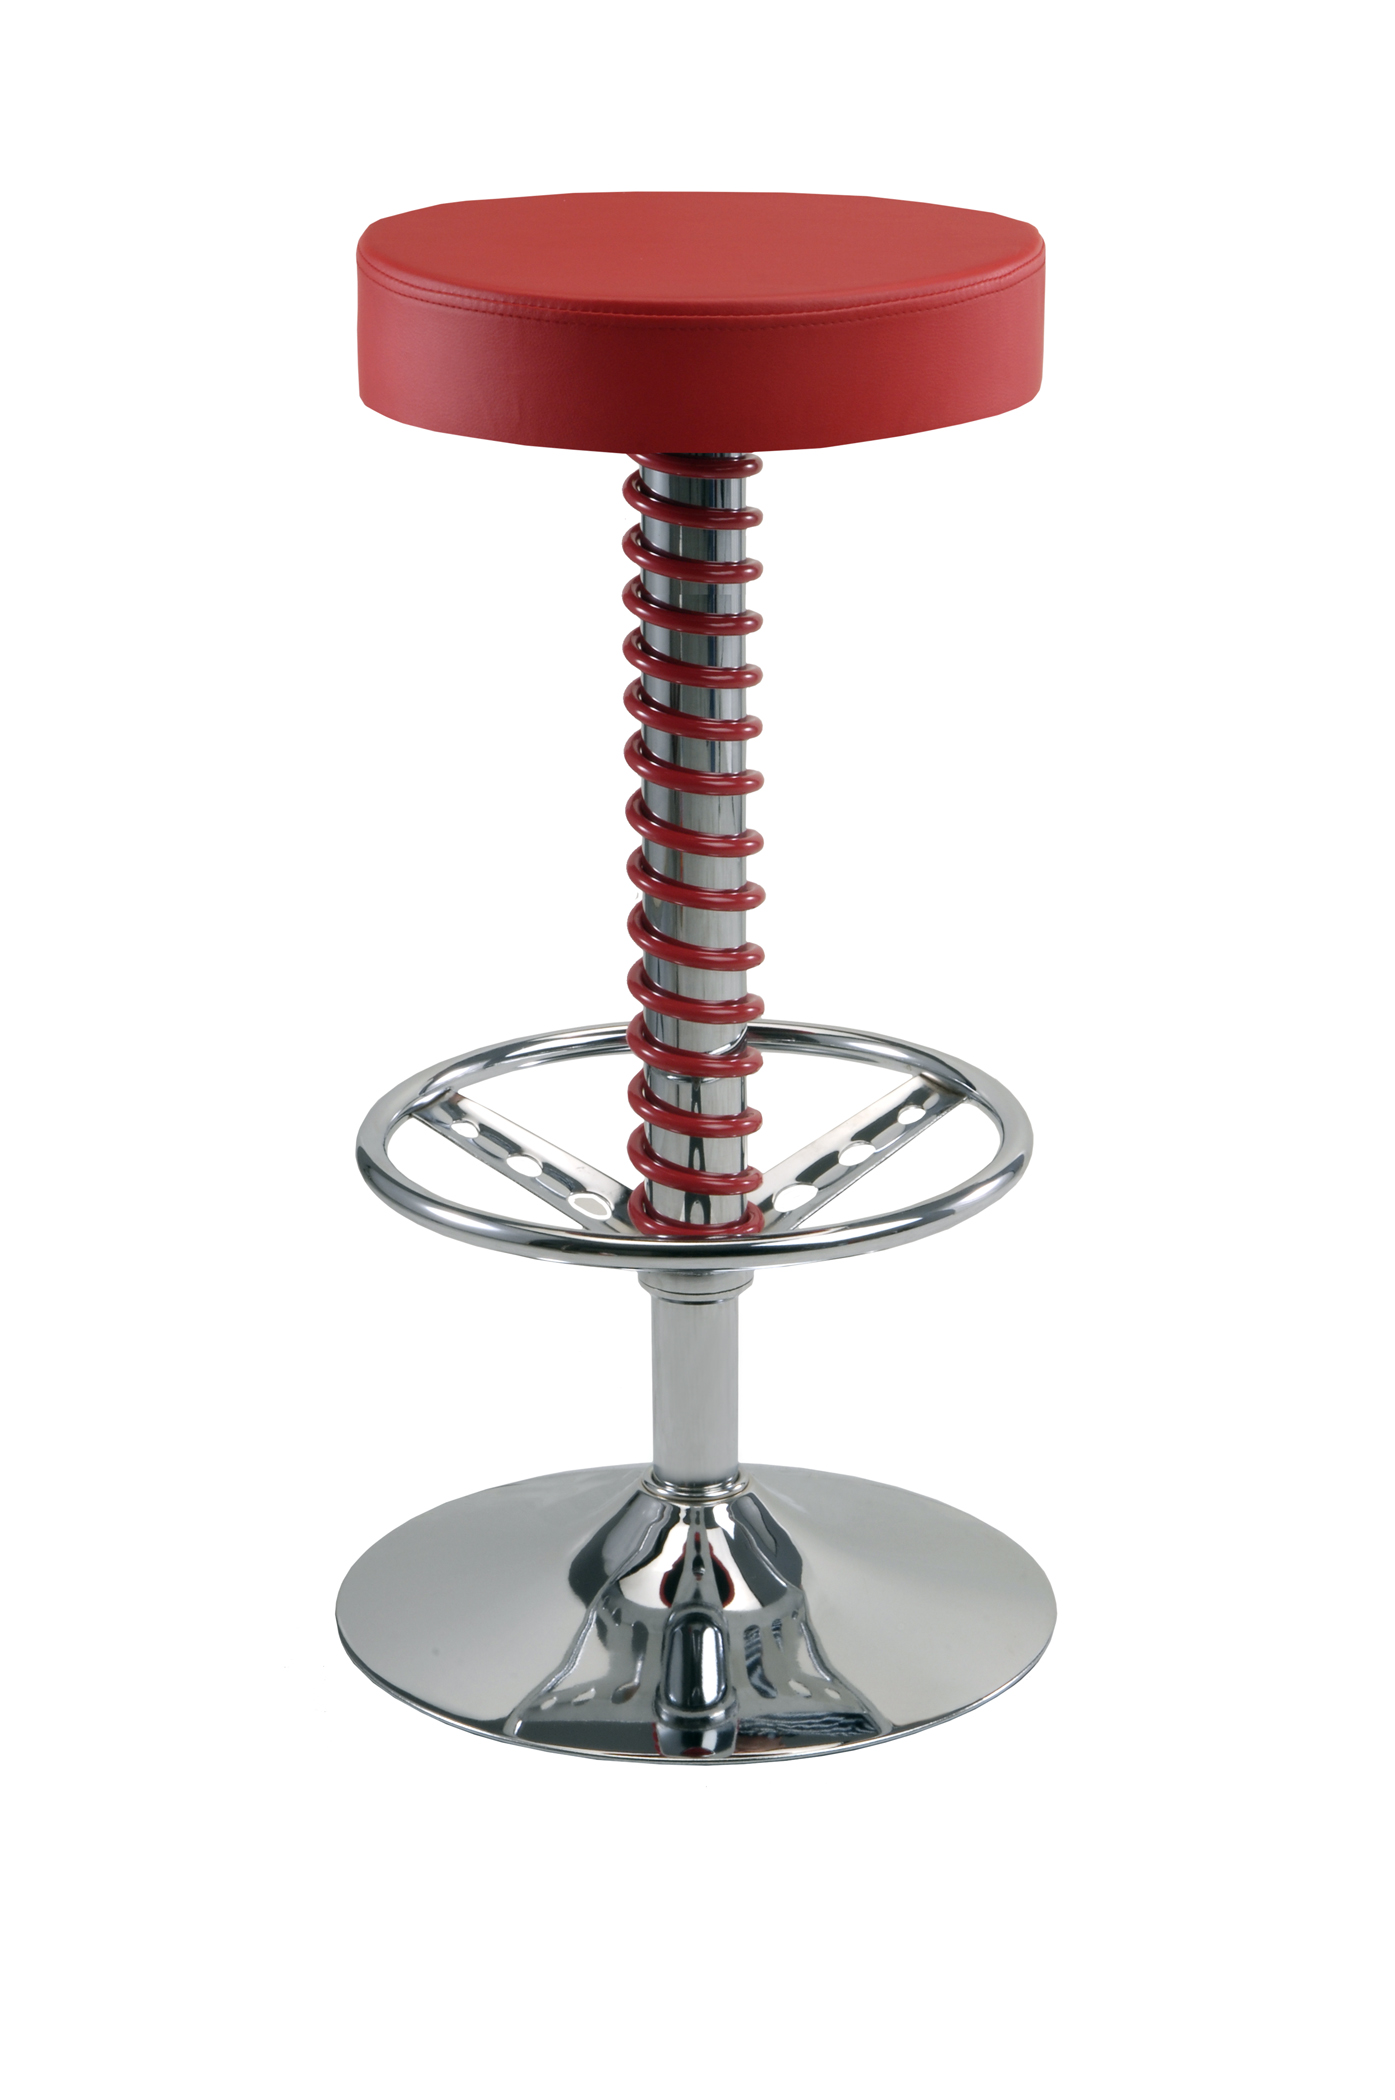 Intro-Tech Automotive, Pitstop Furniture, PC1400R Crew Stool Red, Barstool